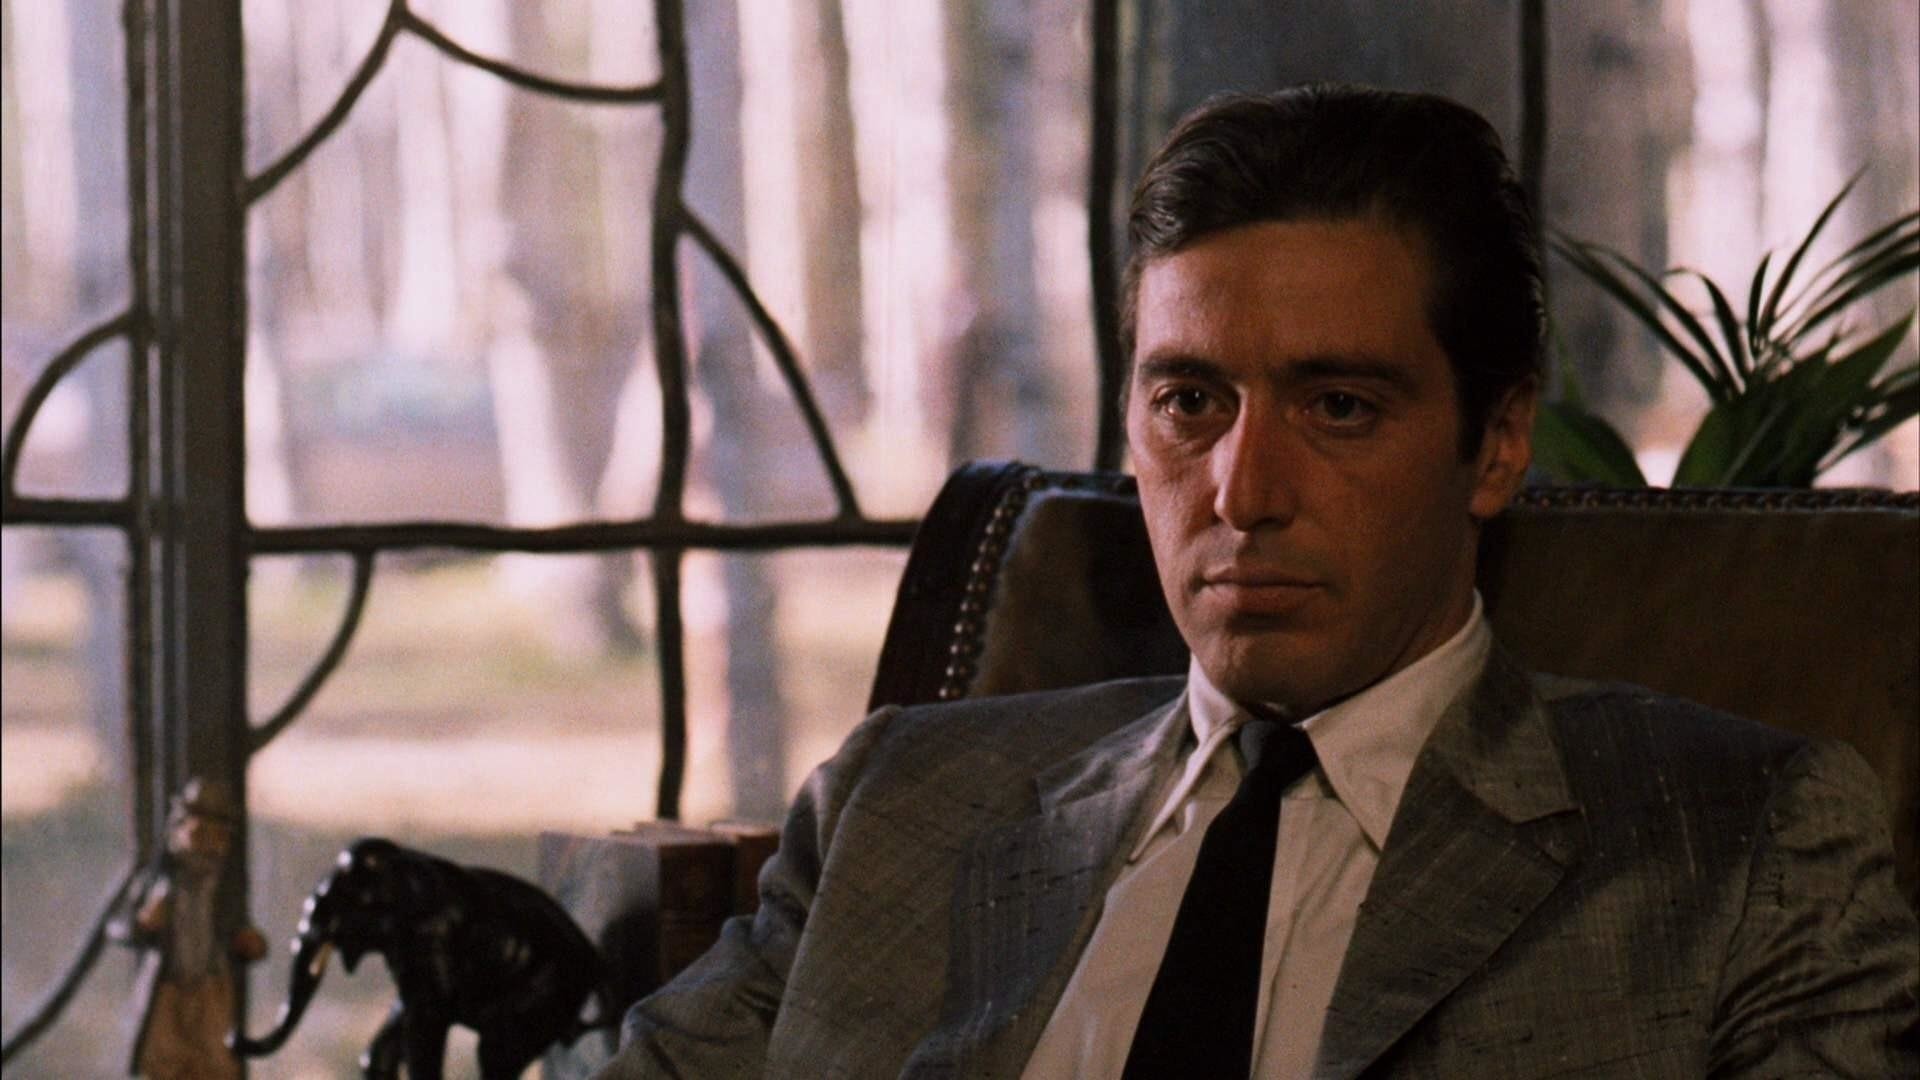 1920x1080 Movie - The Godfather Part II The Godfather Wallpaper